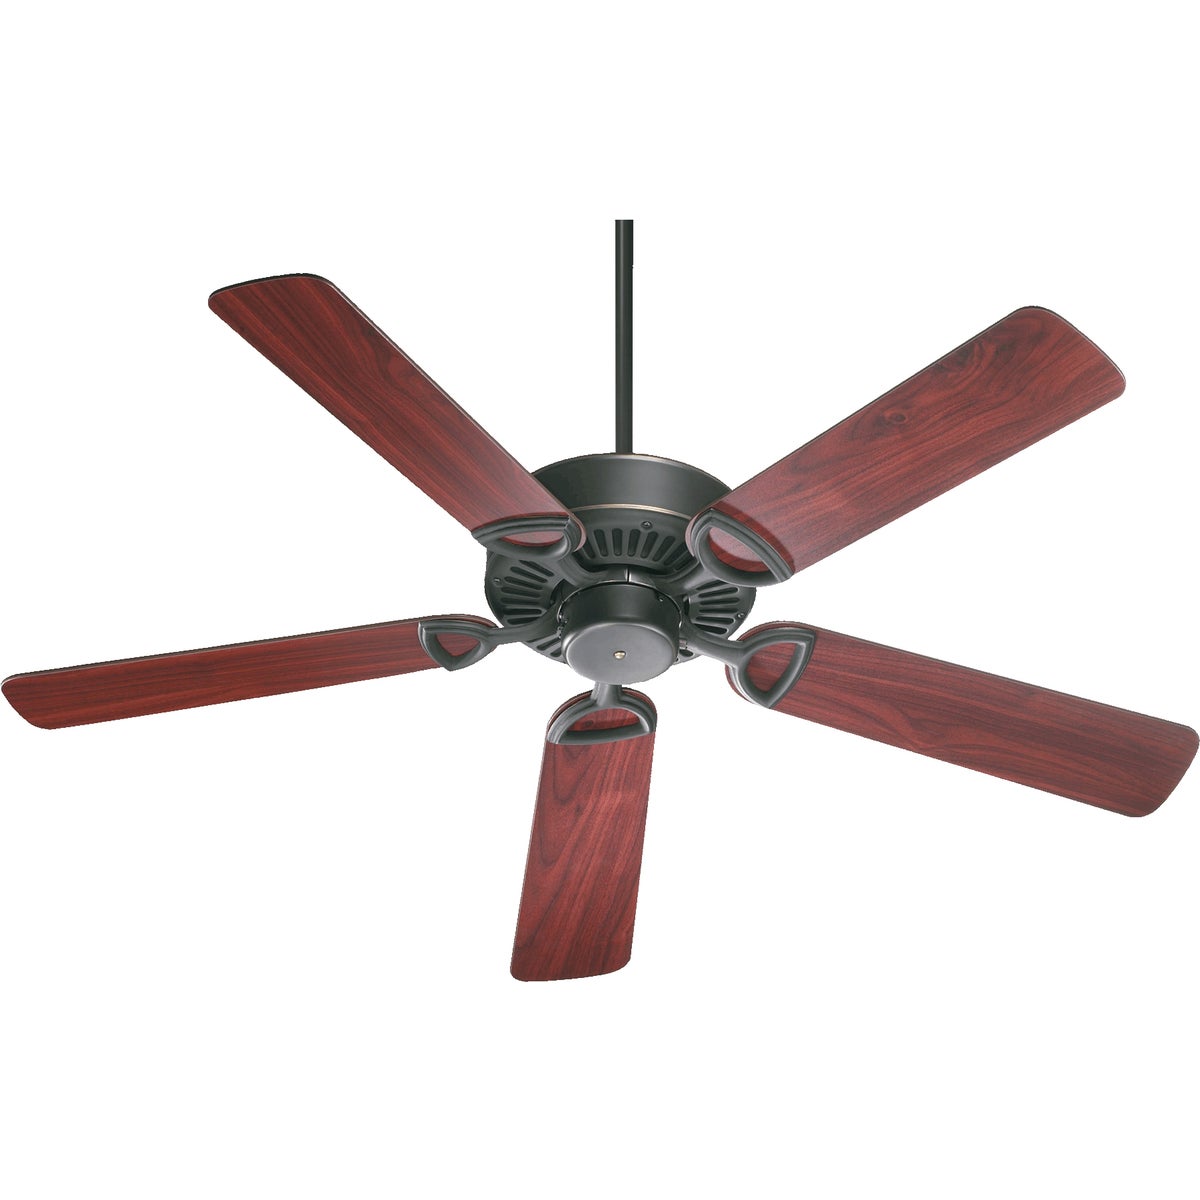 Traditional Ceiling Fan with wood blades, classic design, and rounded-edged blades. Complements wooden items in your rooms. 12"H x 52"W. Limited Lifetime Warranty.